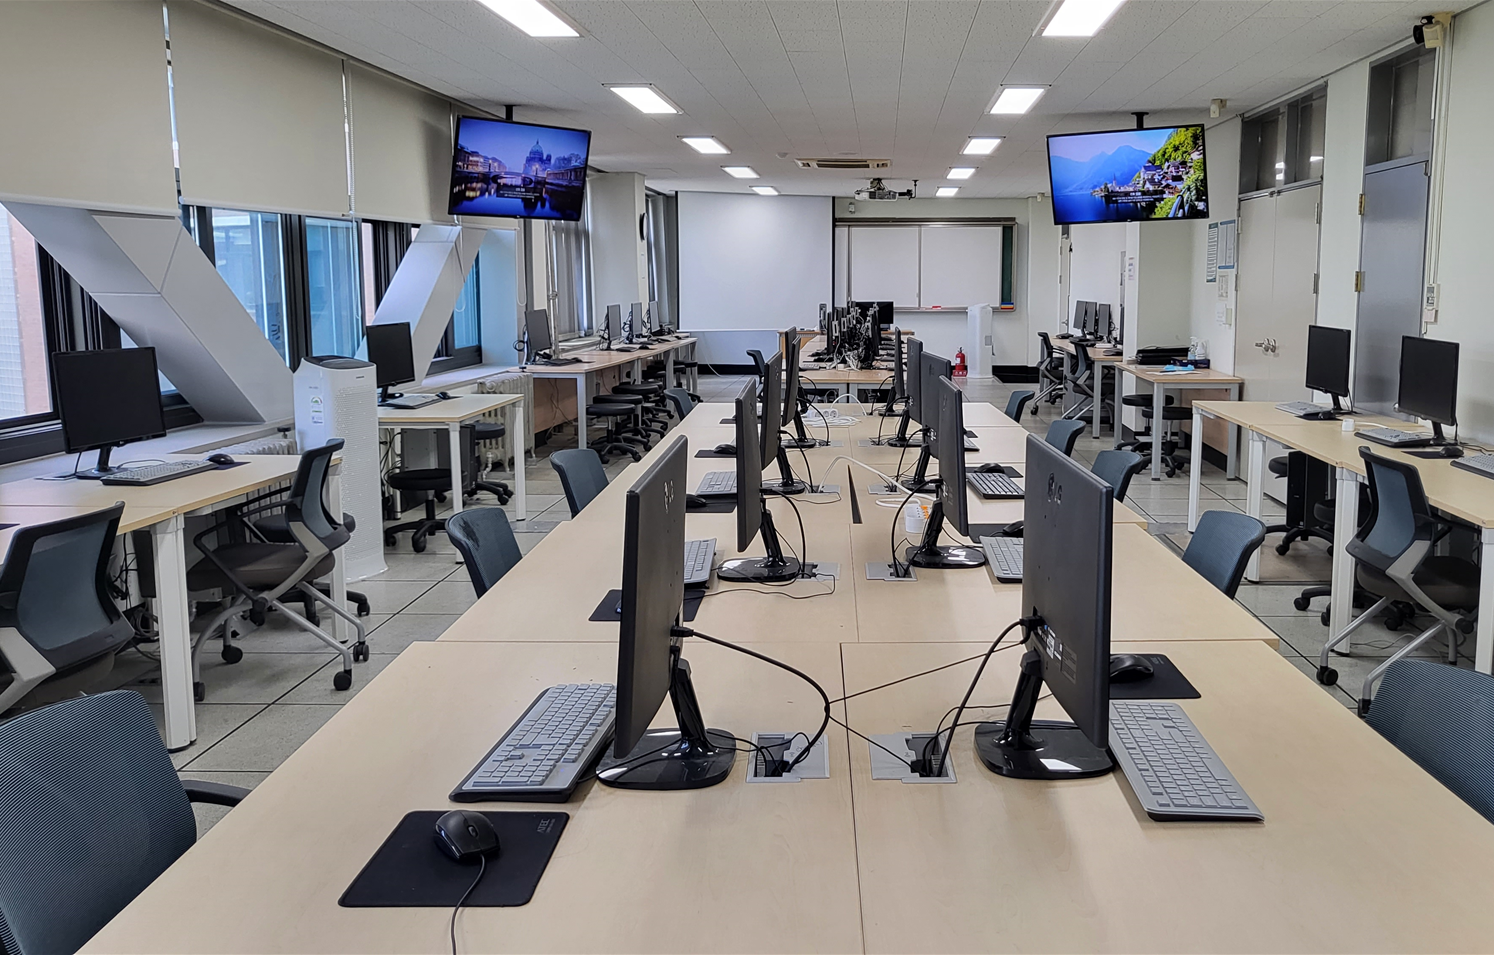 Embedded hands-on classroom 사진